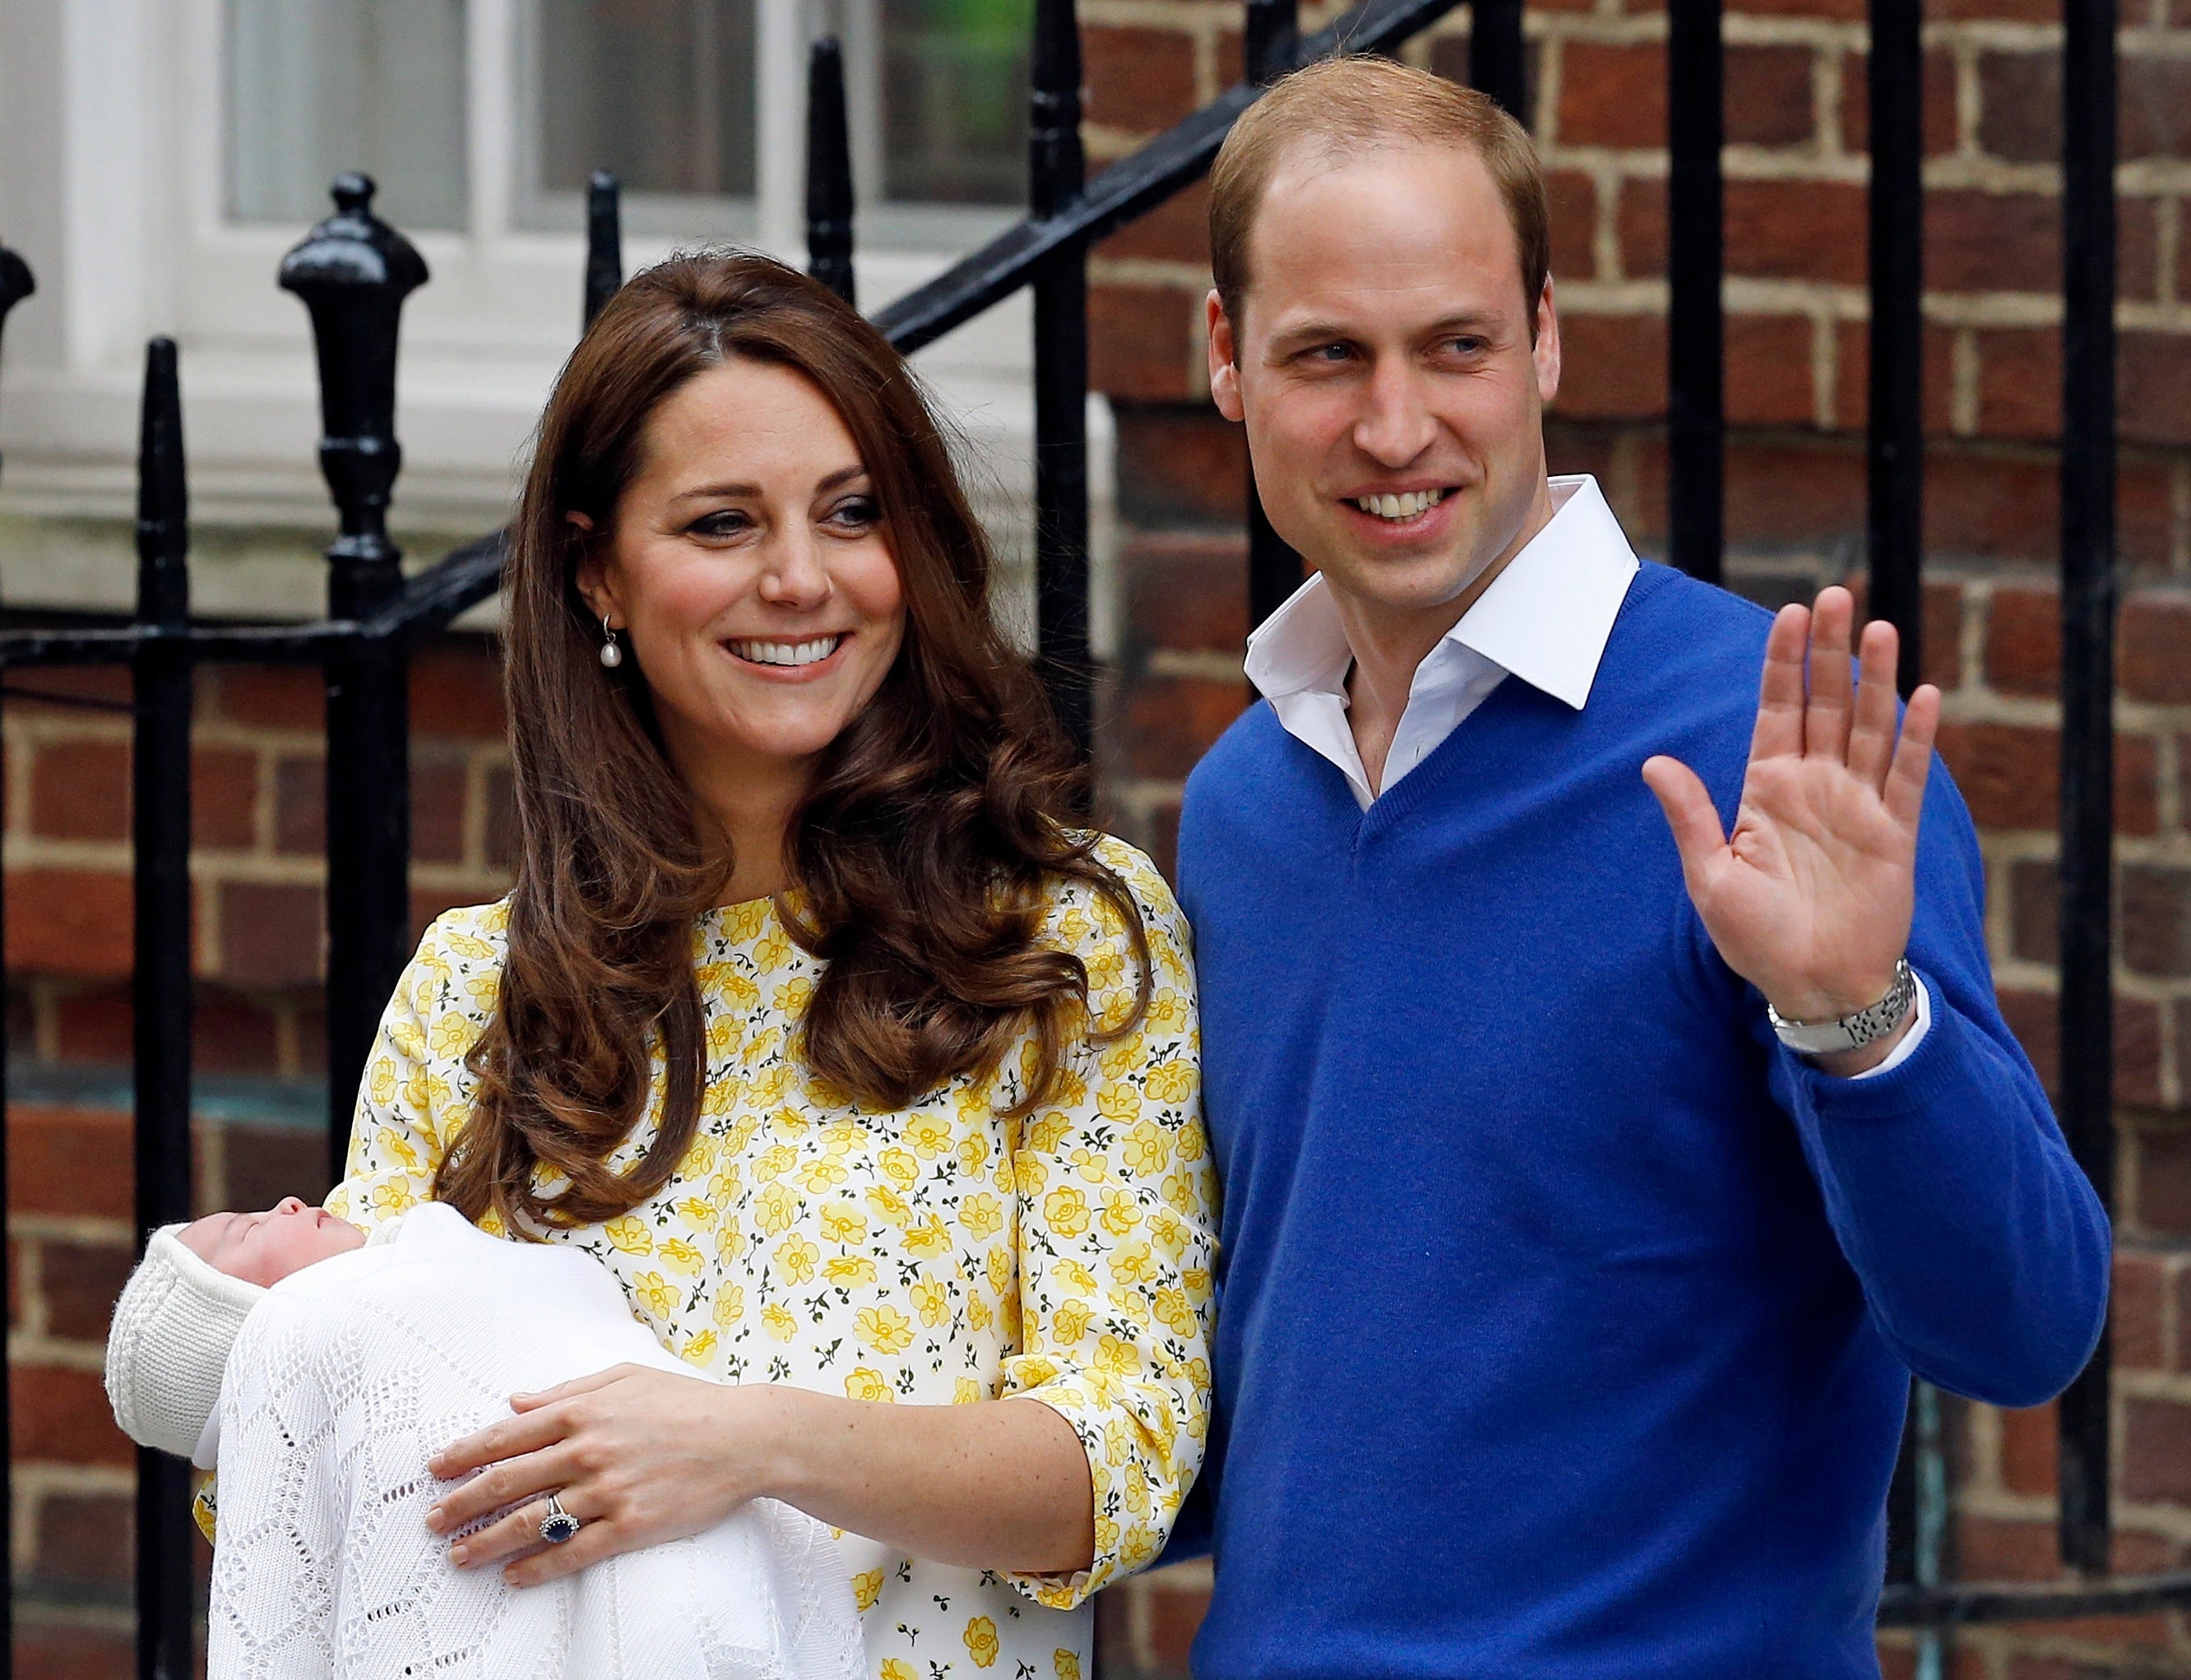 Princess Charlotte is currently third in line to the throne